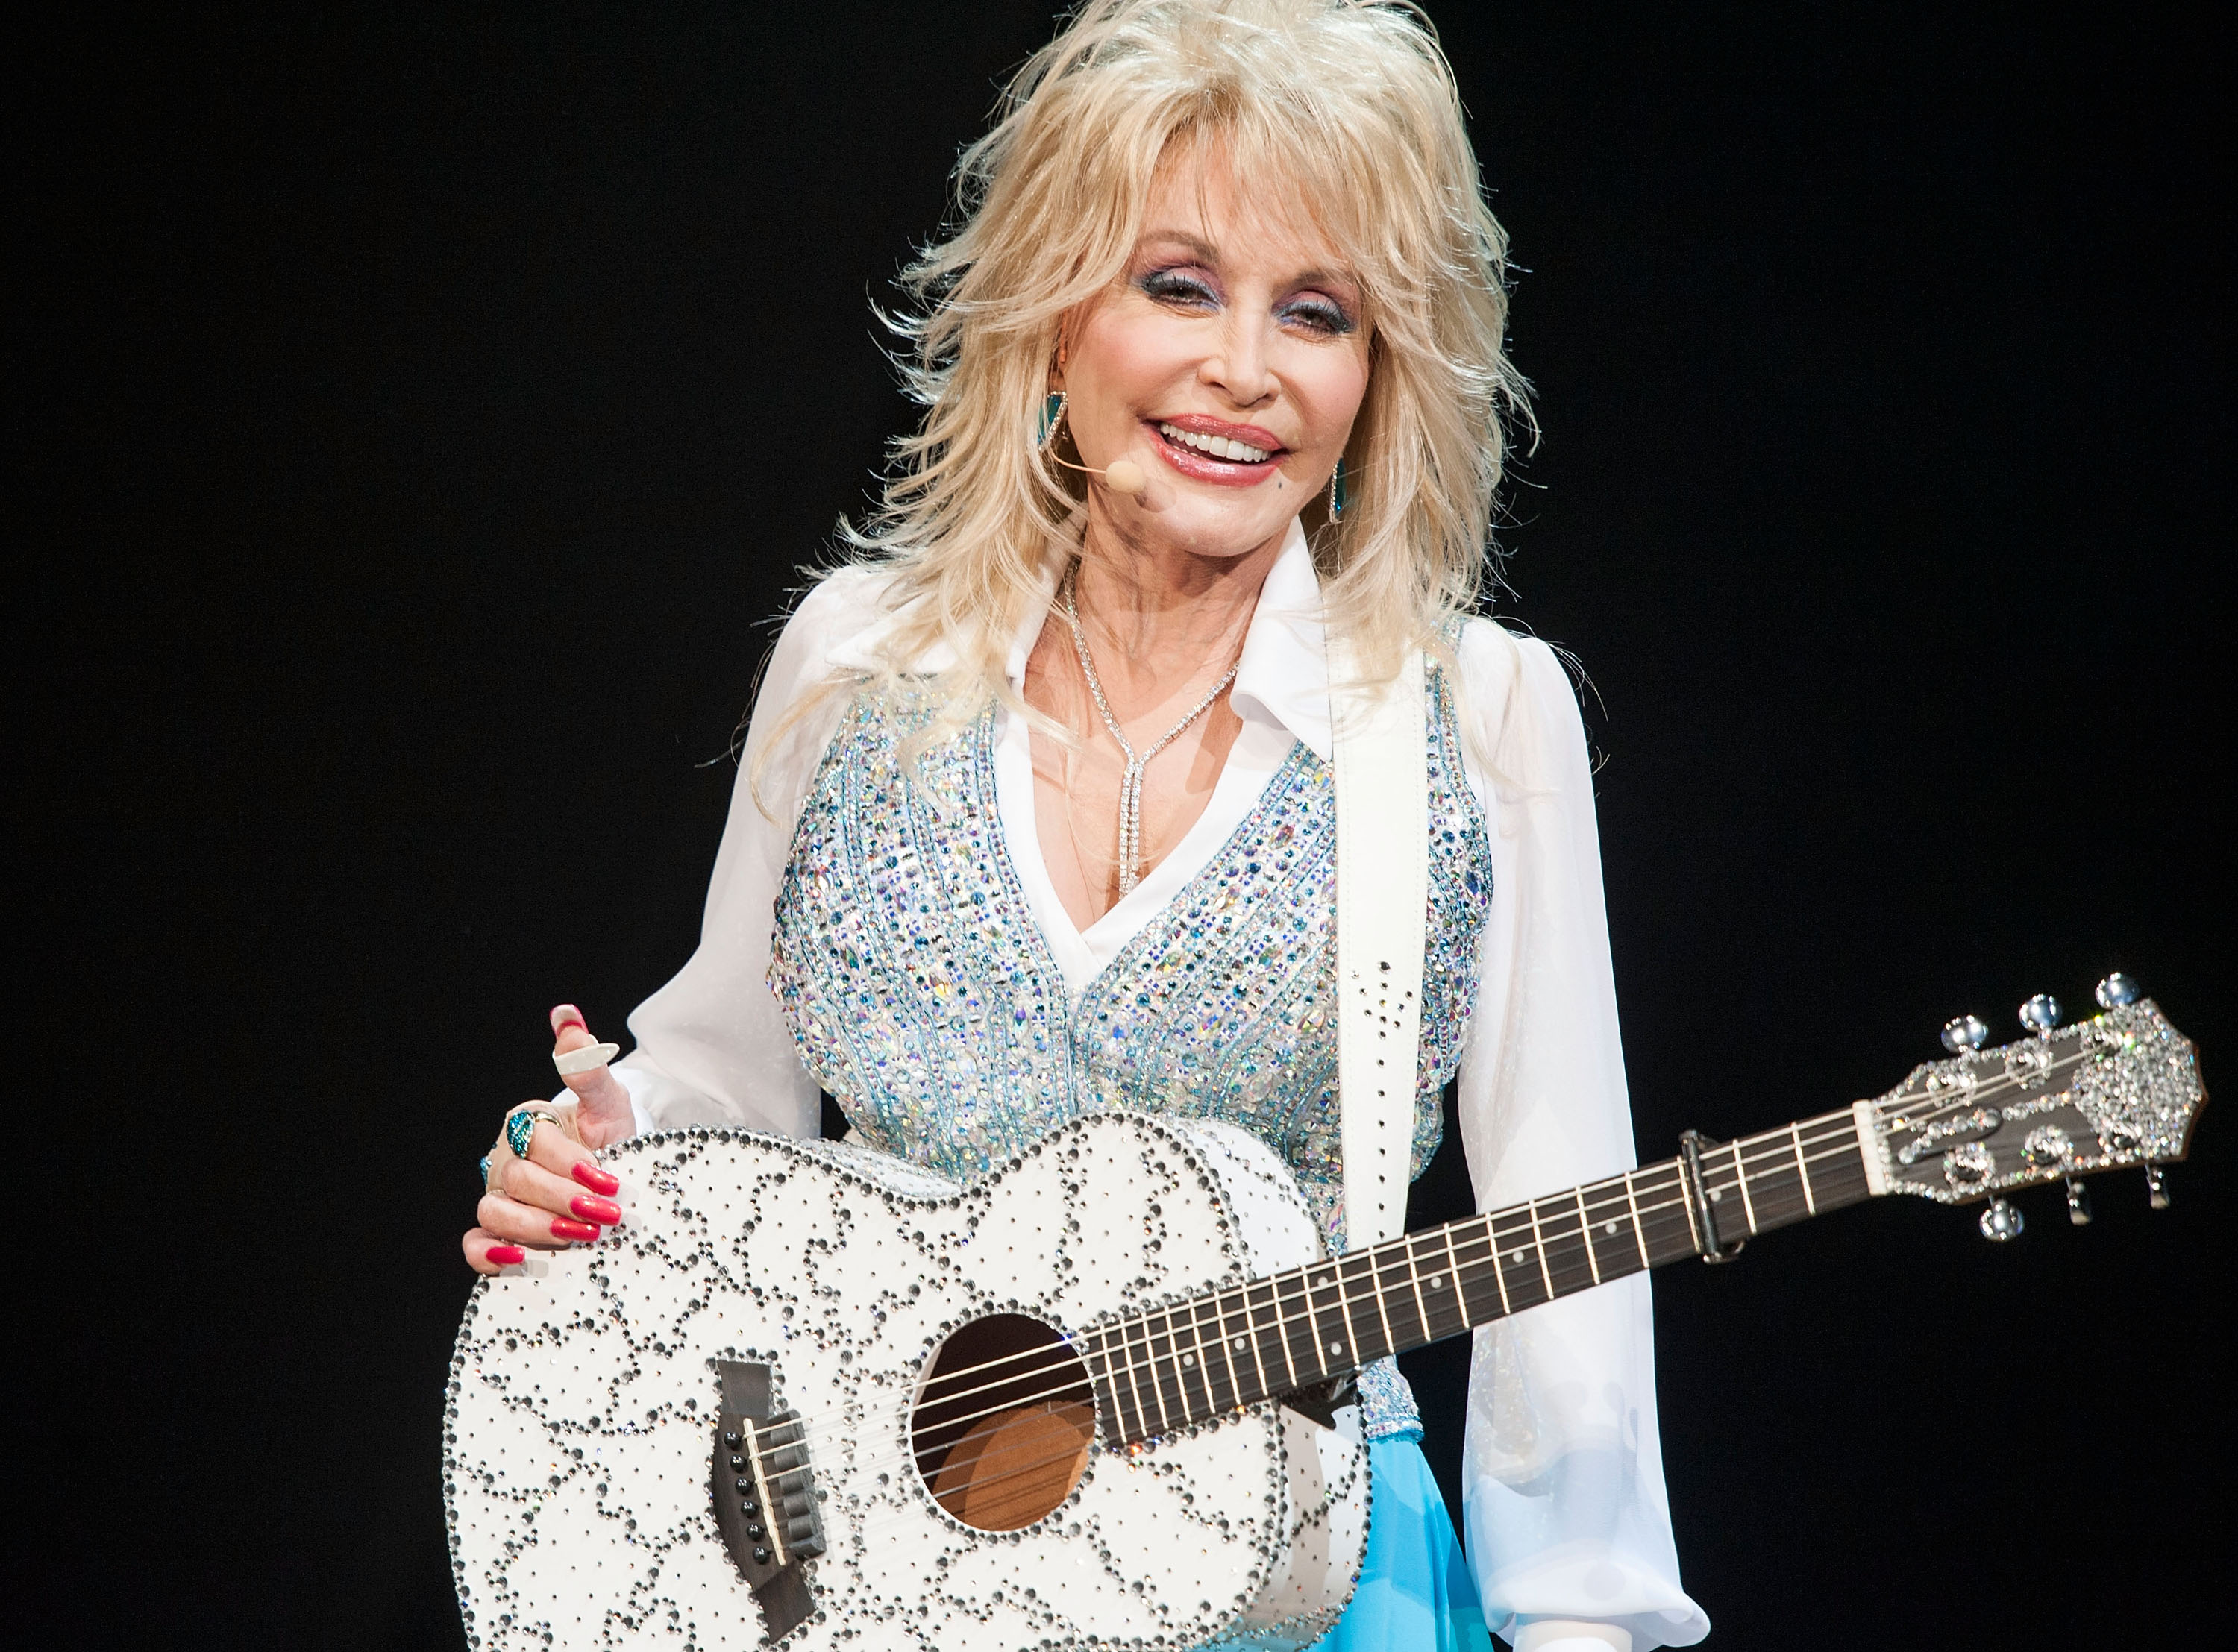 Dolly Parton wears a jeweled shirt and holds a bedazzled guitar. Dolly Parton recently turned down her Rock & Roll Hall of Fame nomination.